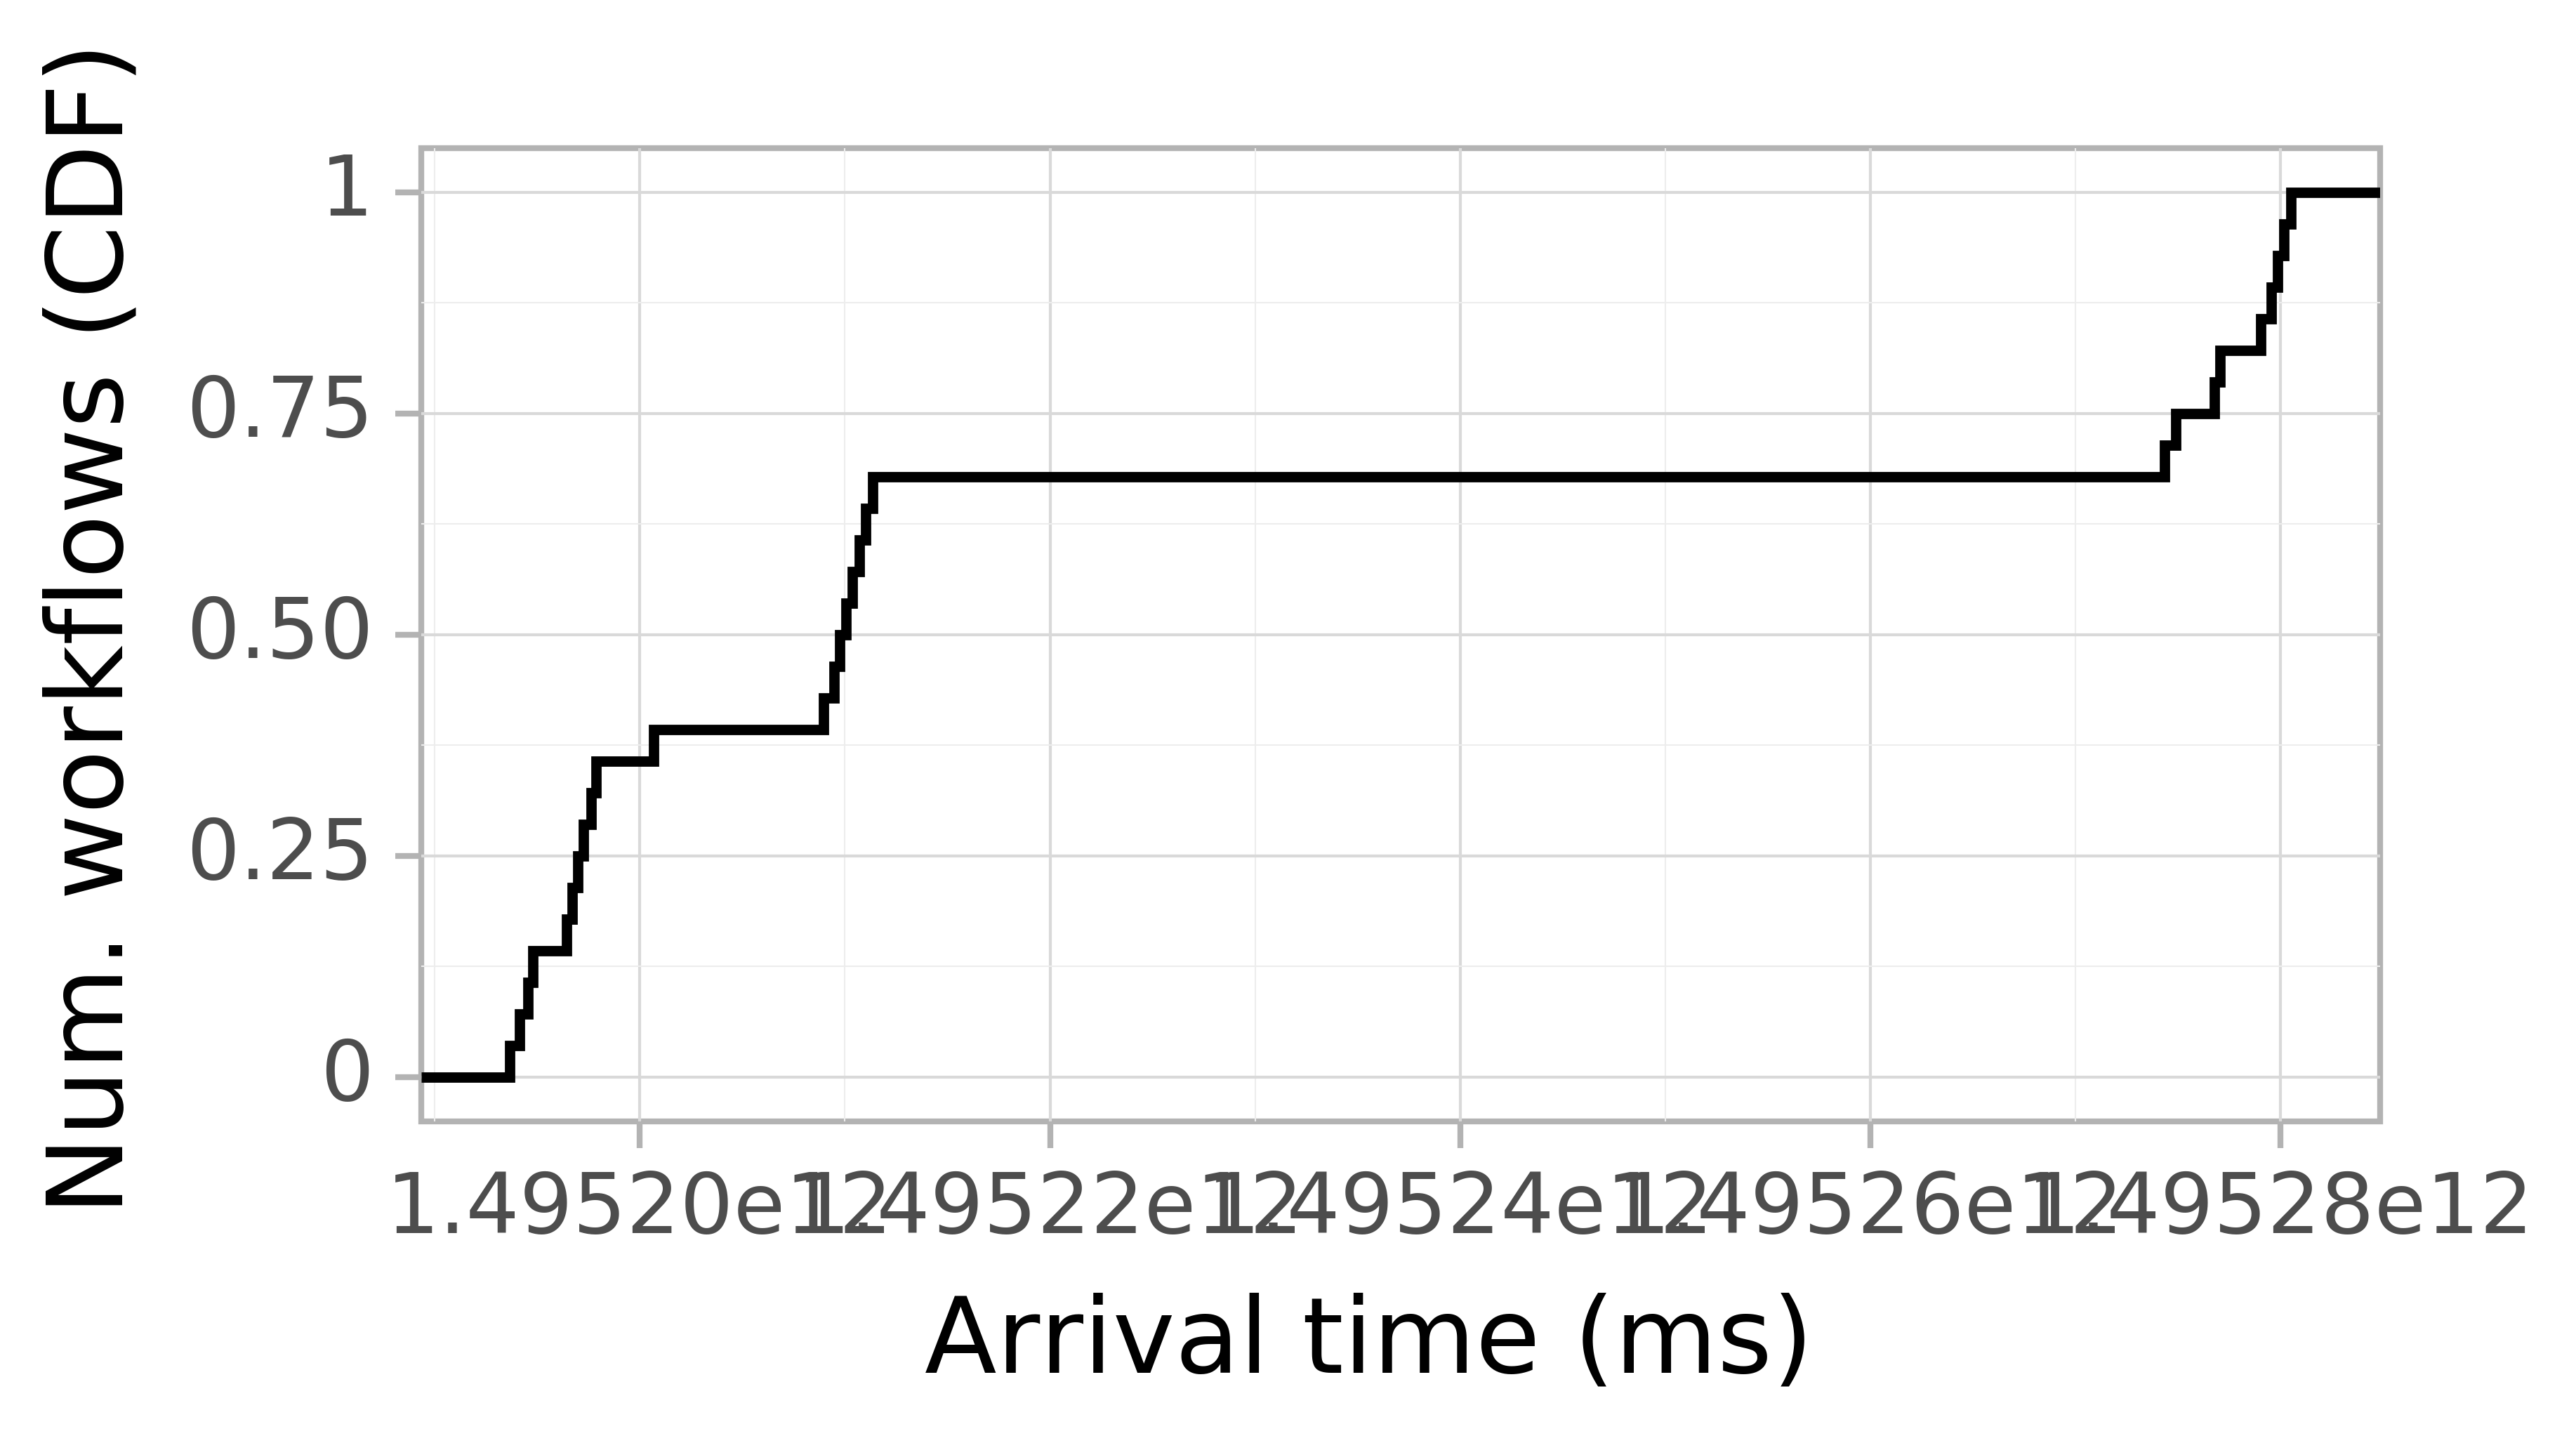 Job arrival CDF graph for the askalon-new_ee66 trace.